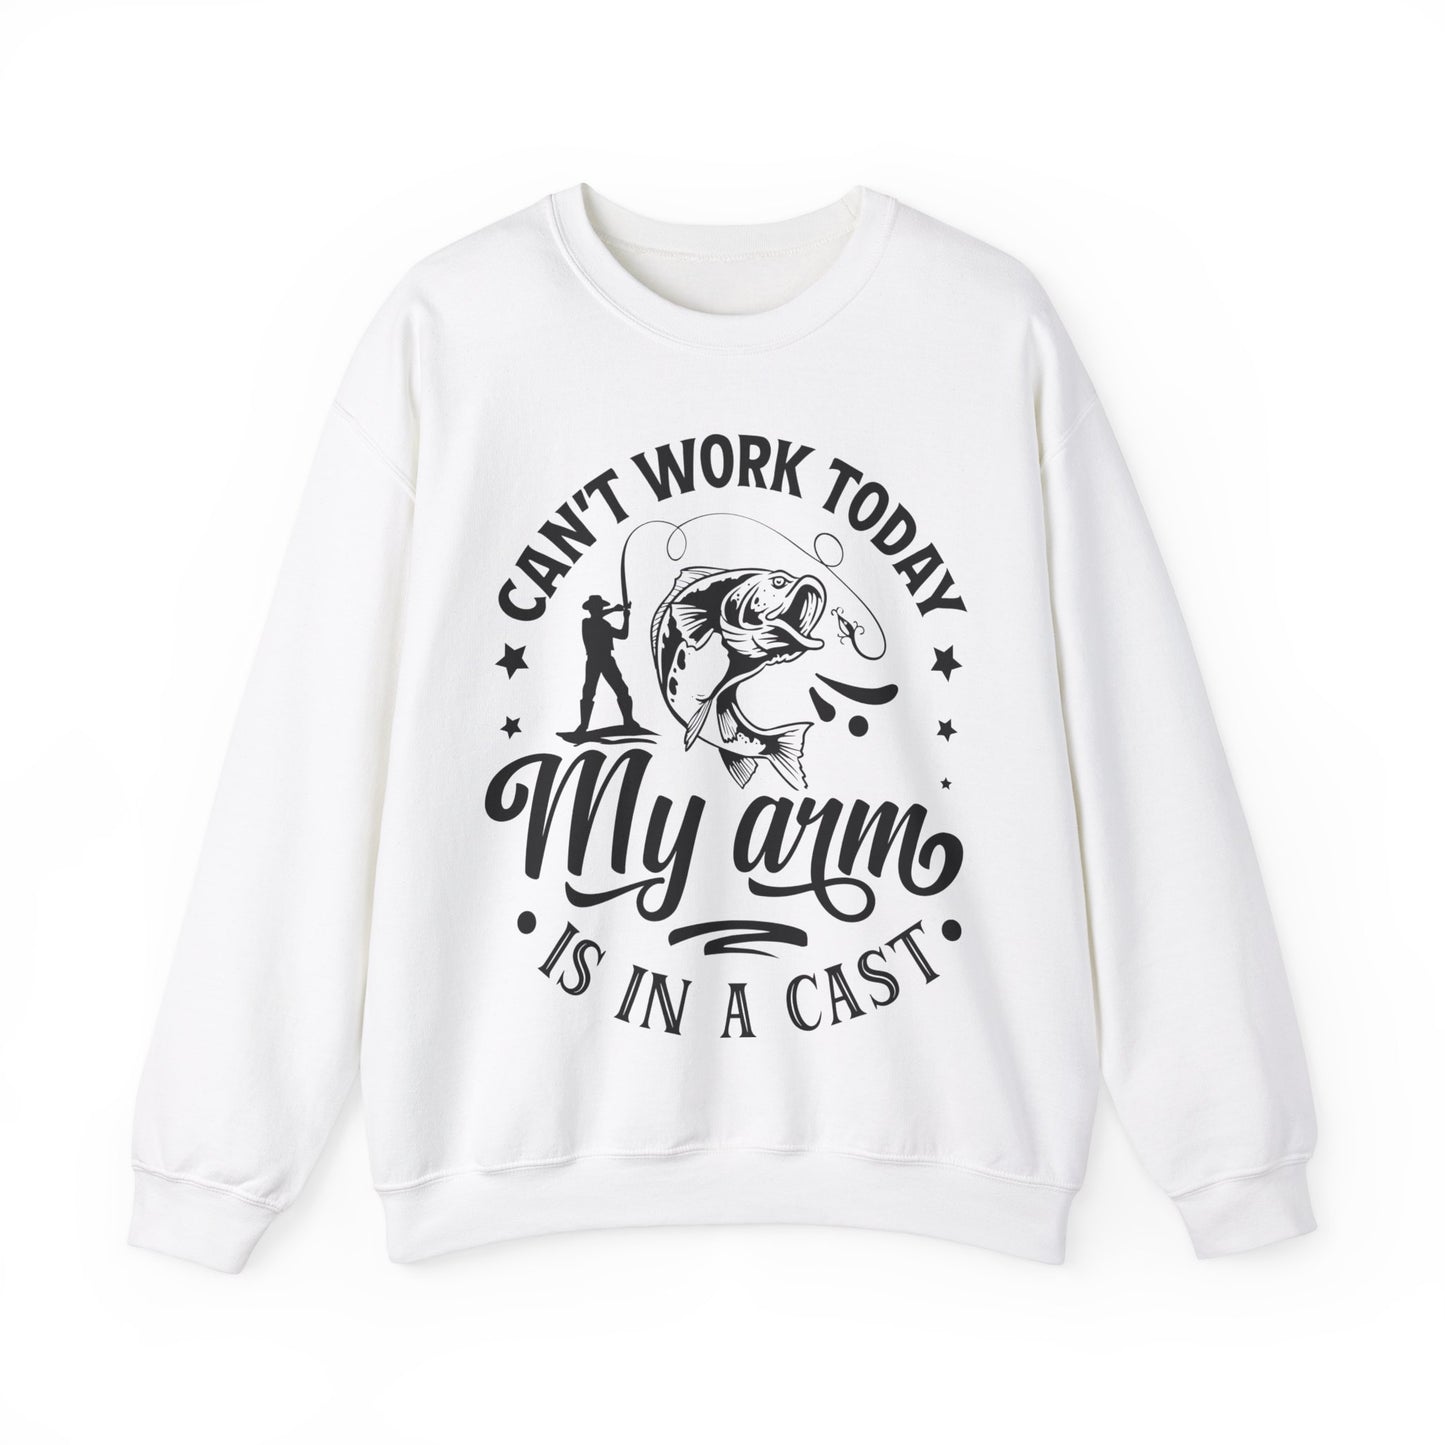 Can't work today, my arm is in a cast - Unisex Heavy Blend™ Crewneck Sweatshirt